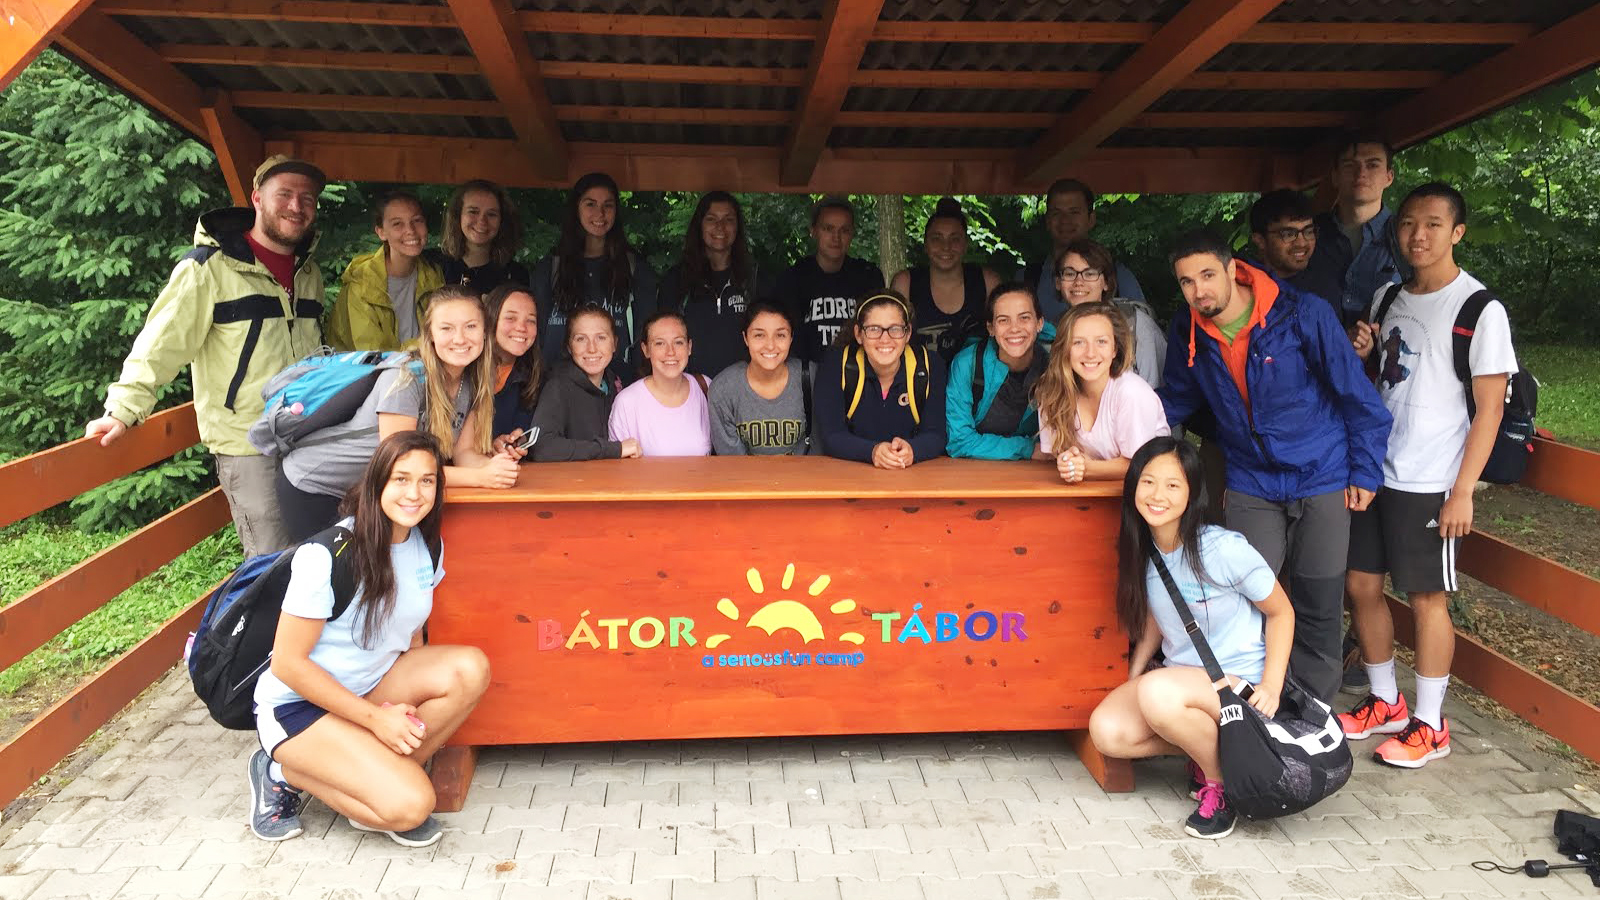 Group photo of Tech students standing under a metal awning and gathered around a counter that has Bator Tabor, a serious fun camp emblazoned on it 